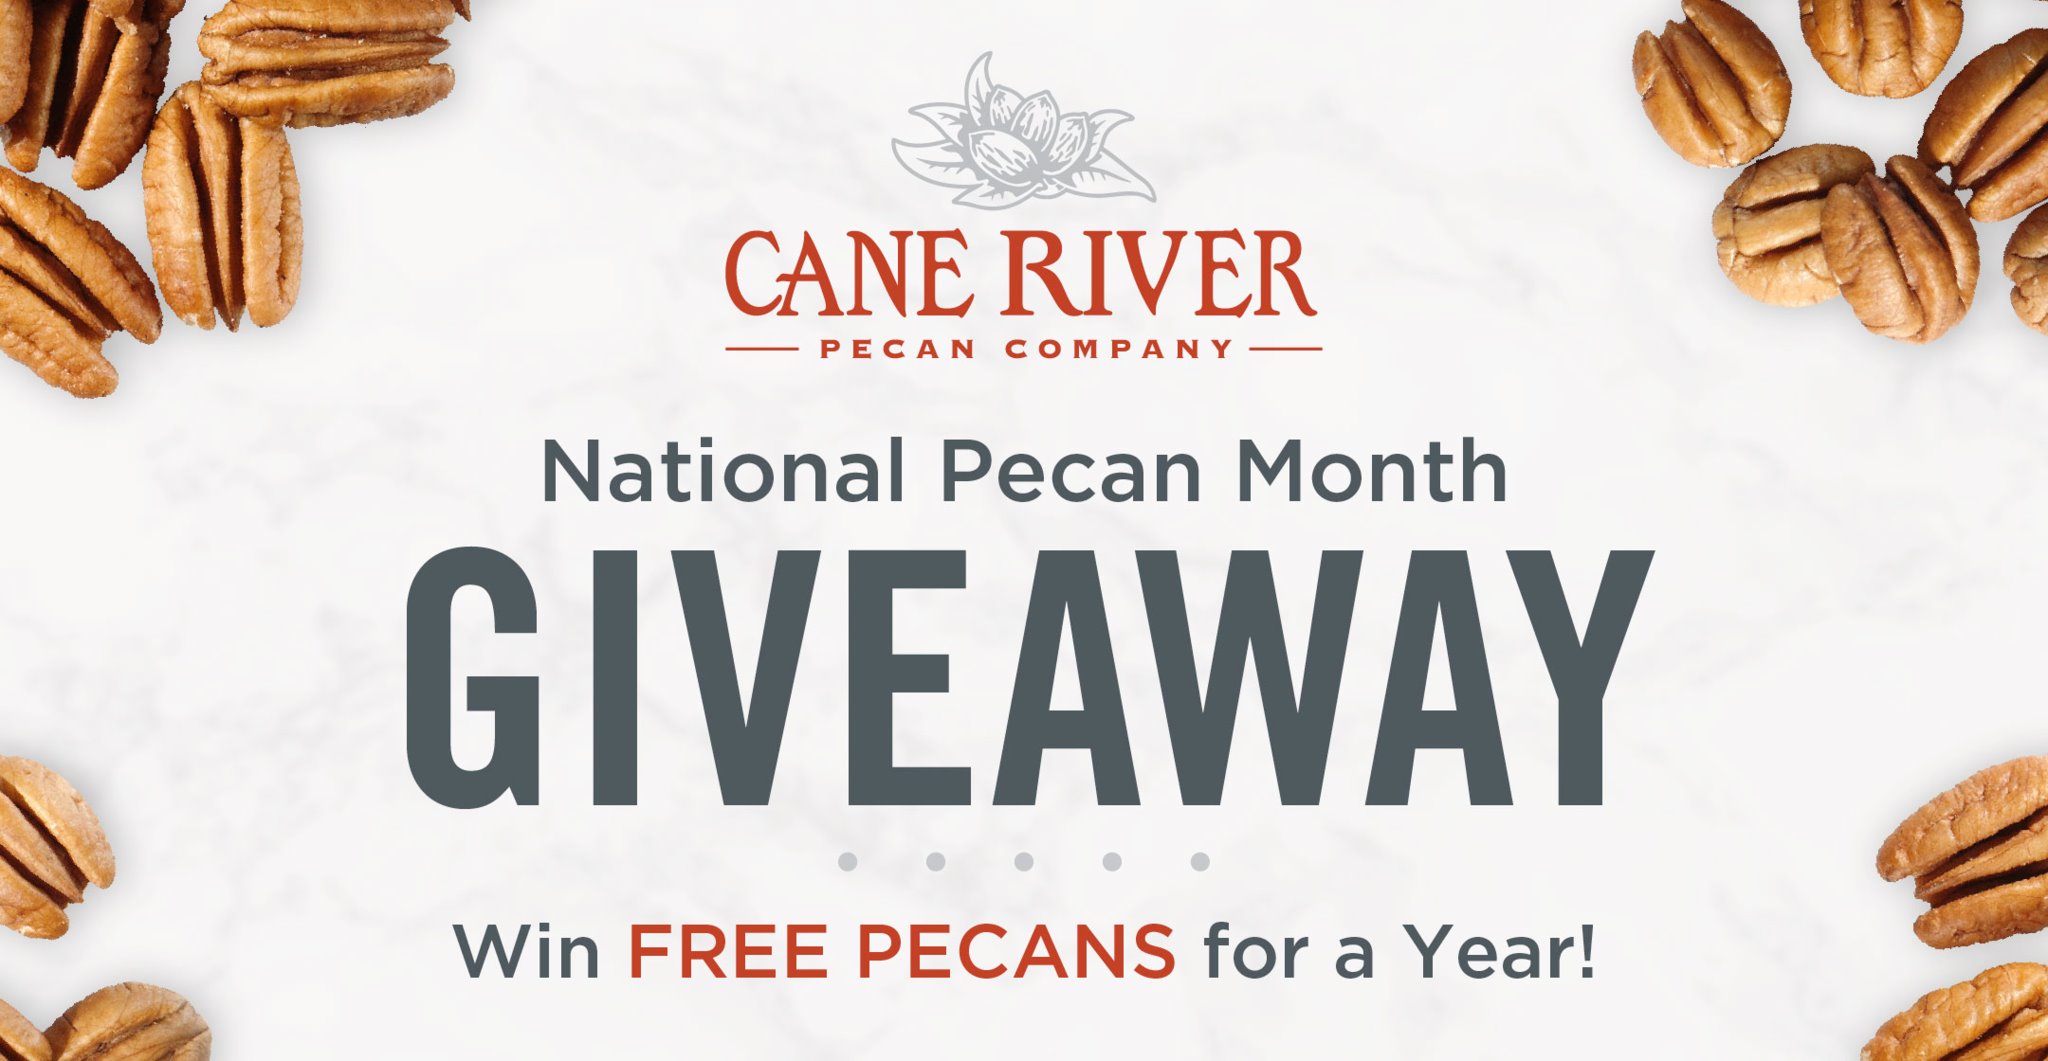 National Pecan Month Giveaway